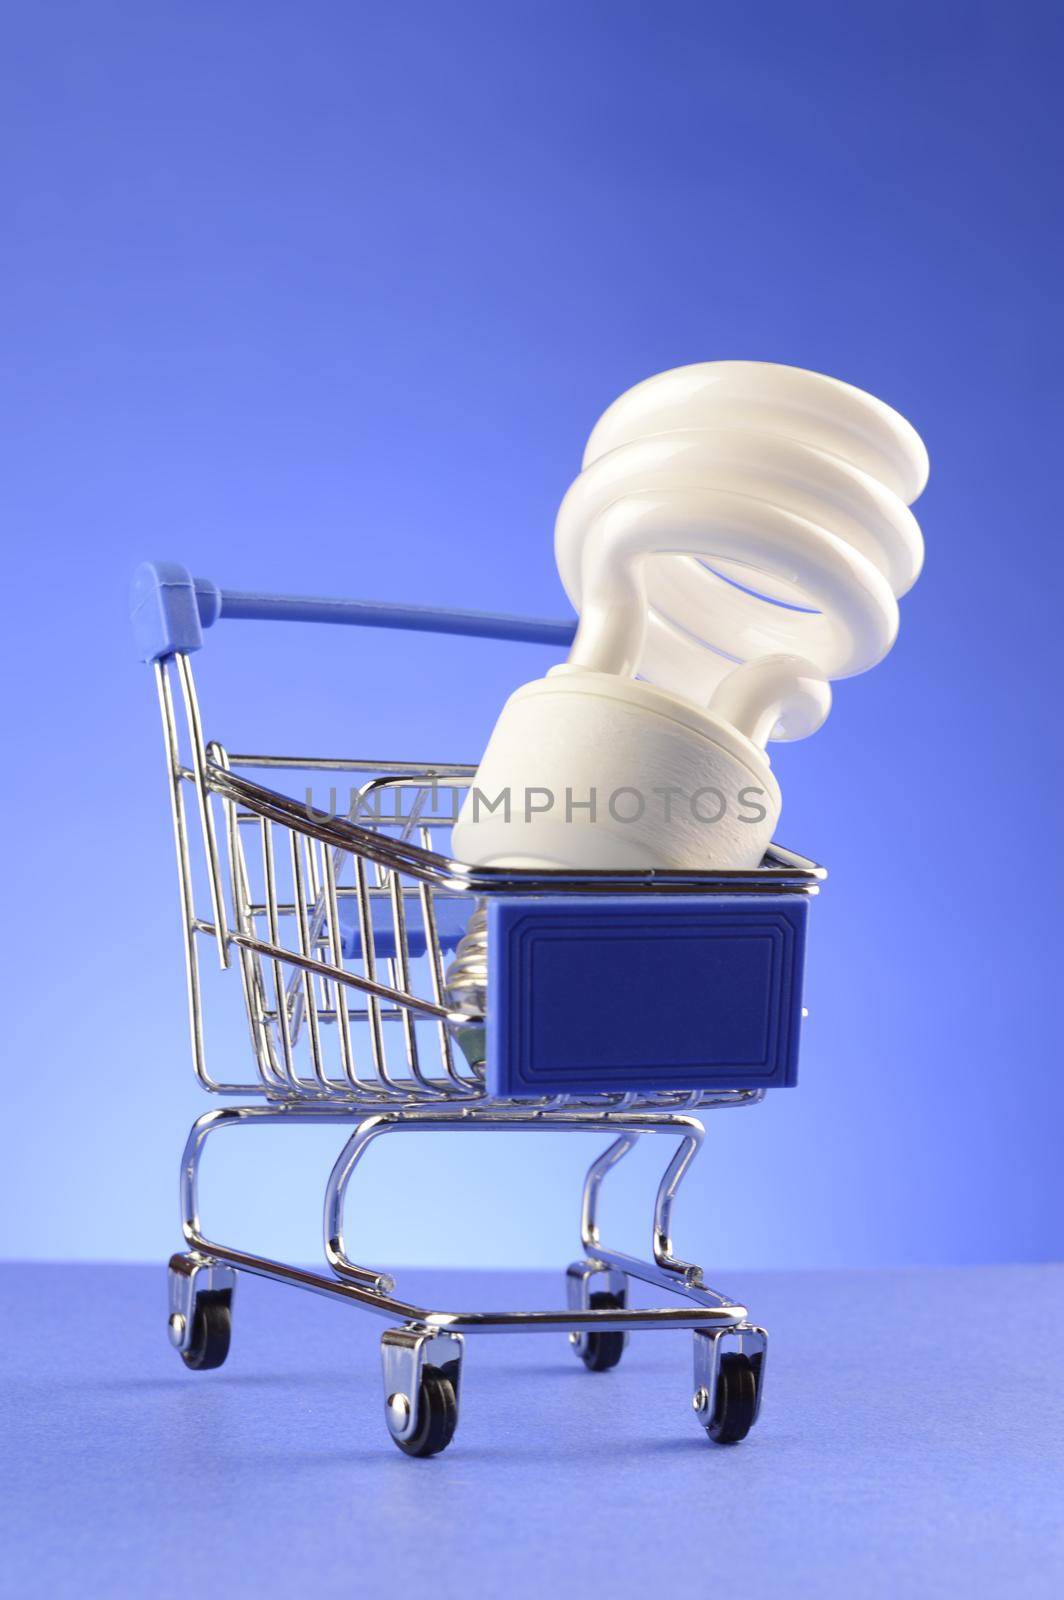 A CFL bulb is inside a miniature shopping cart over a blue background.